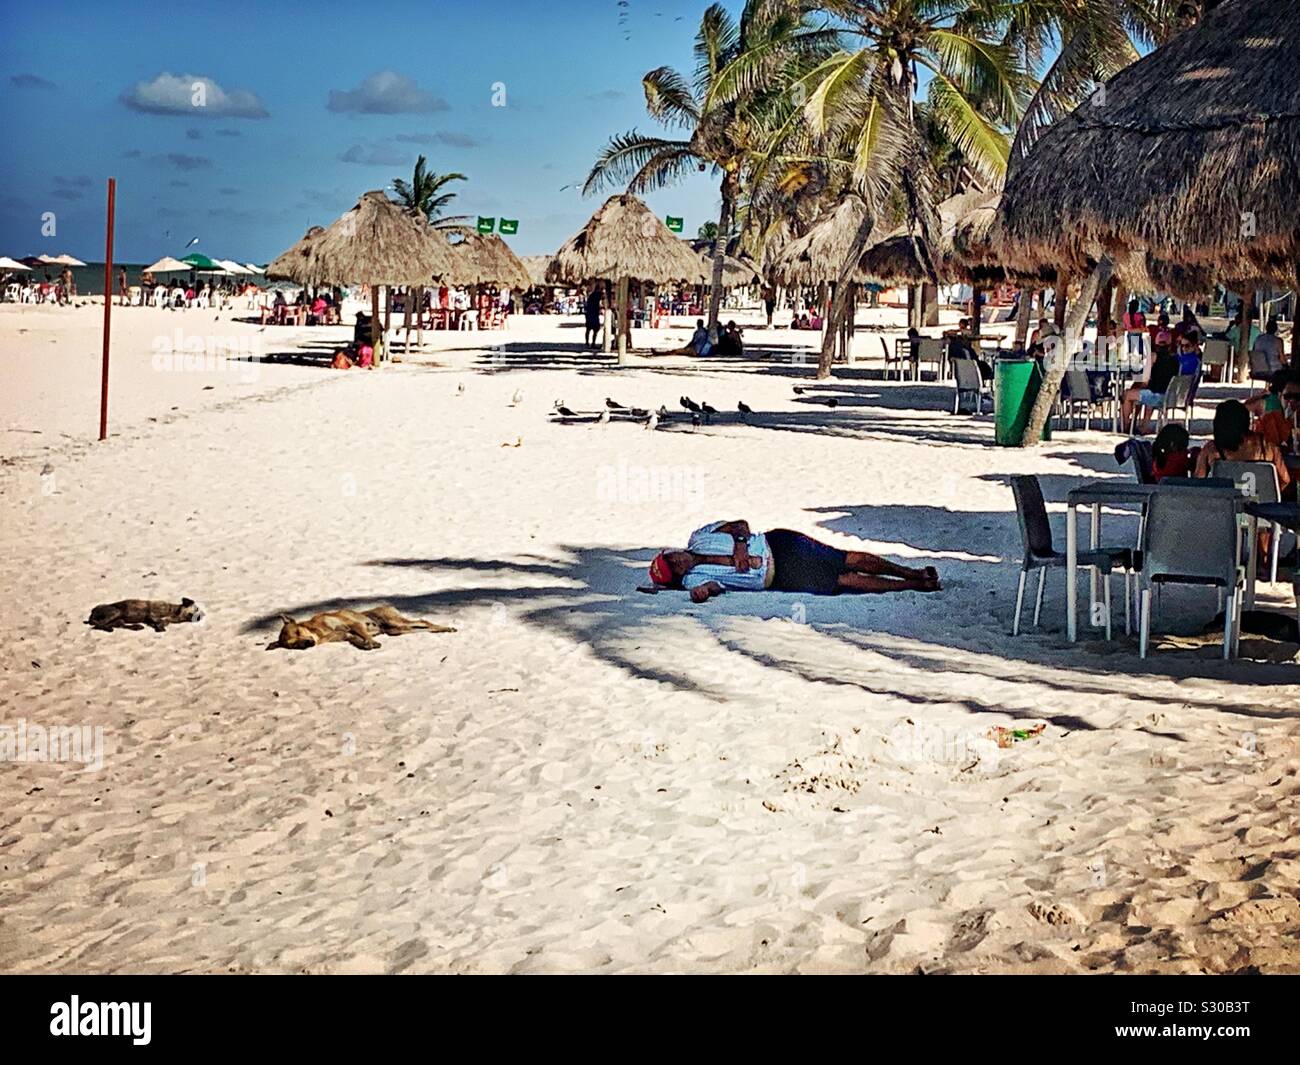 It’s siesta time for a man and two dogs on the sandy beach in Progreso, Yucatán. Stock Photo